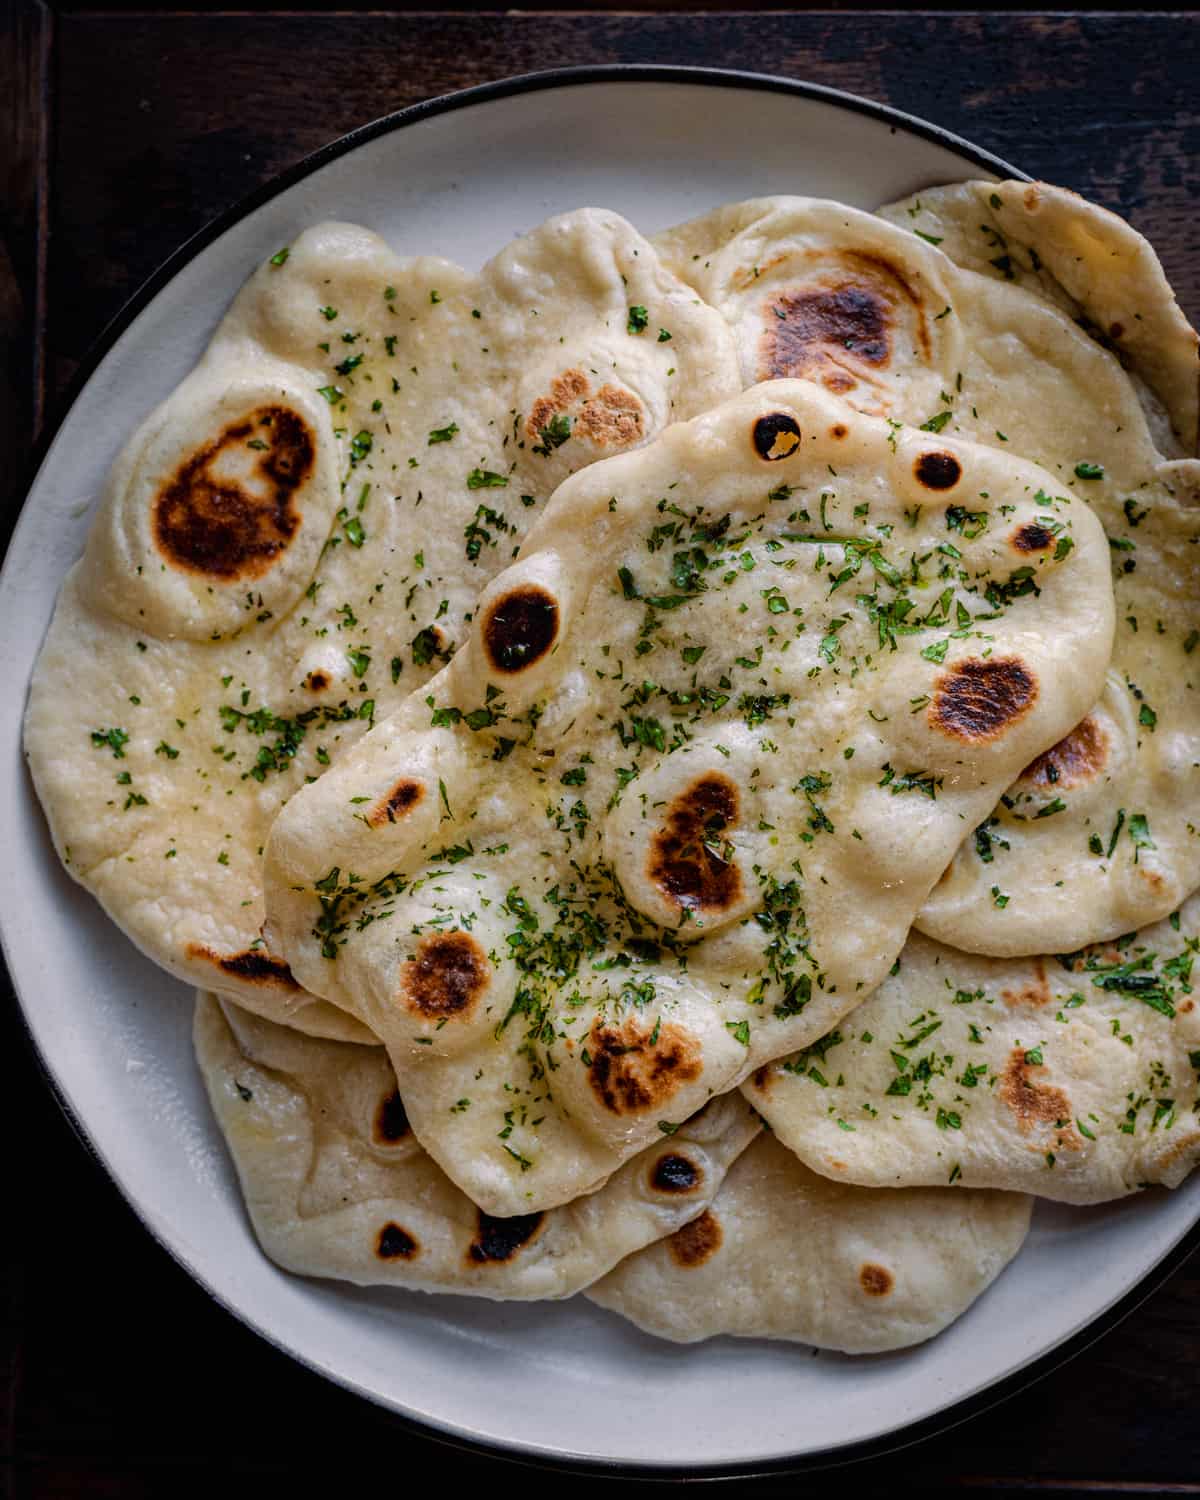 Vegan Naan served on a white plate